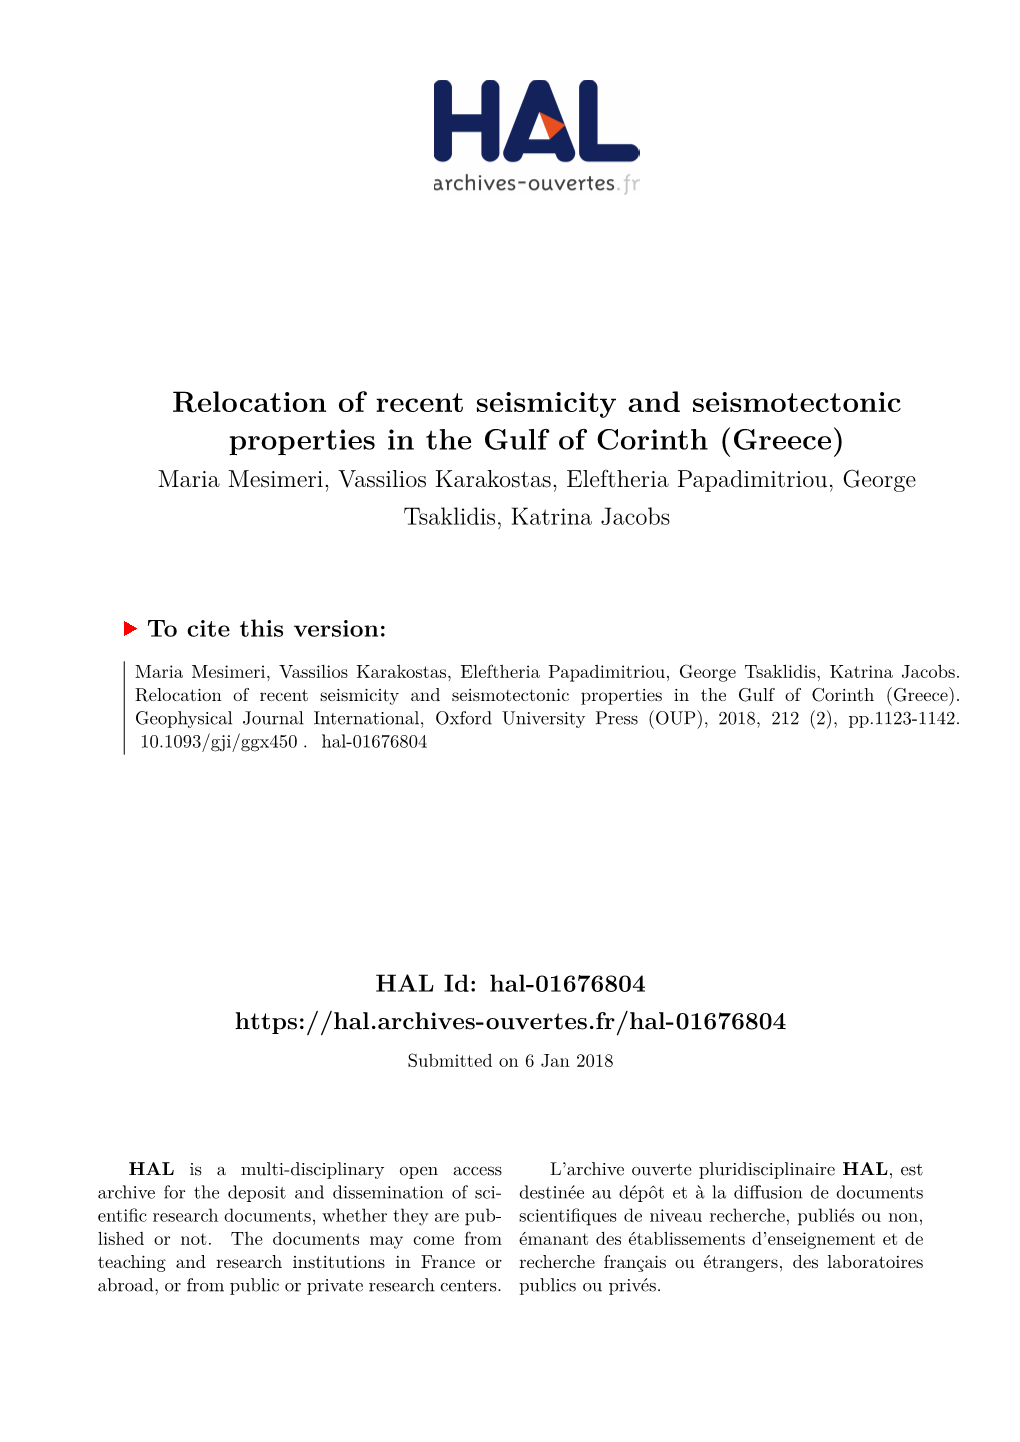 Relocation of Recent Seismicity and Seismotectonic Properties in The